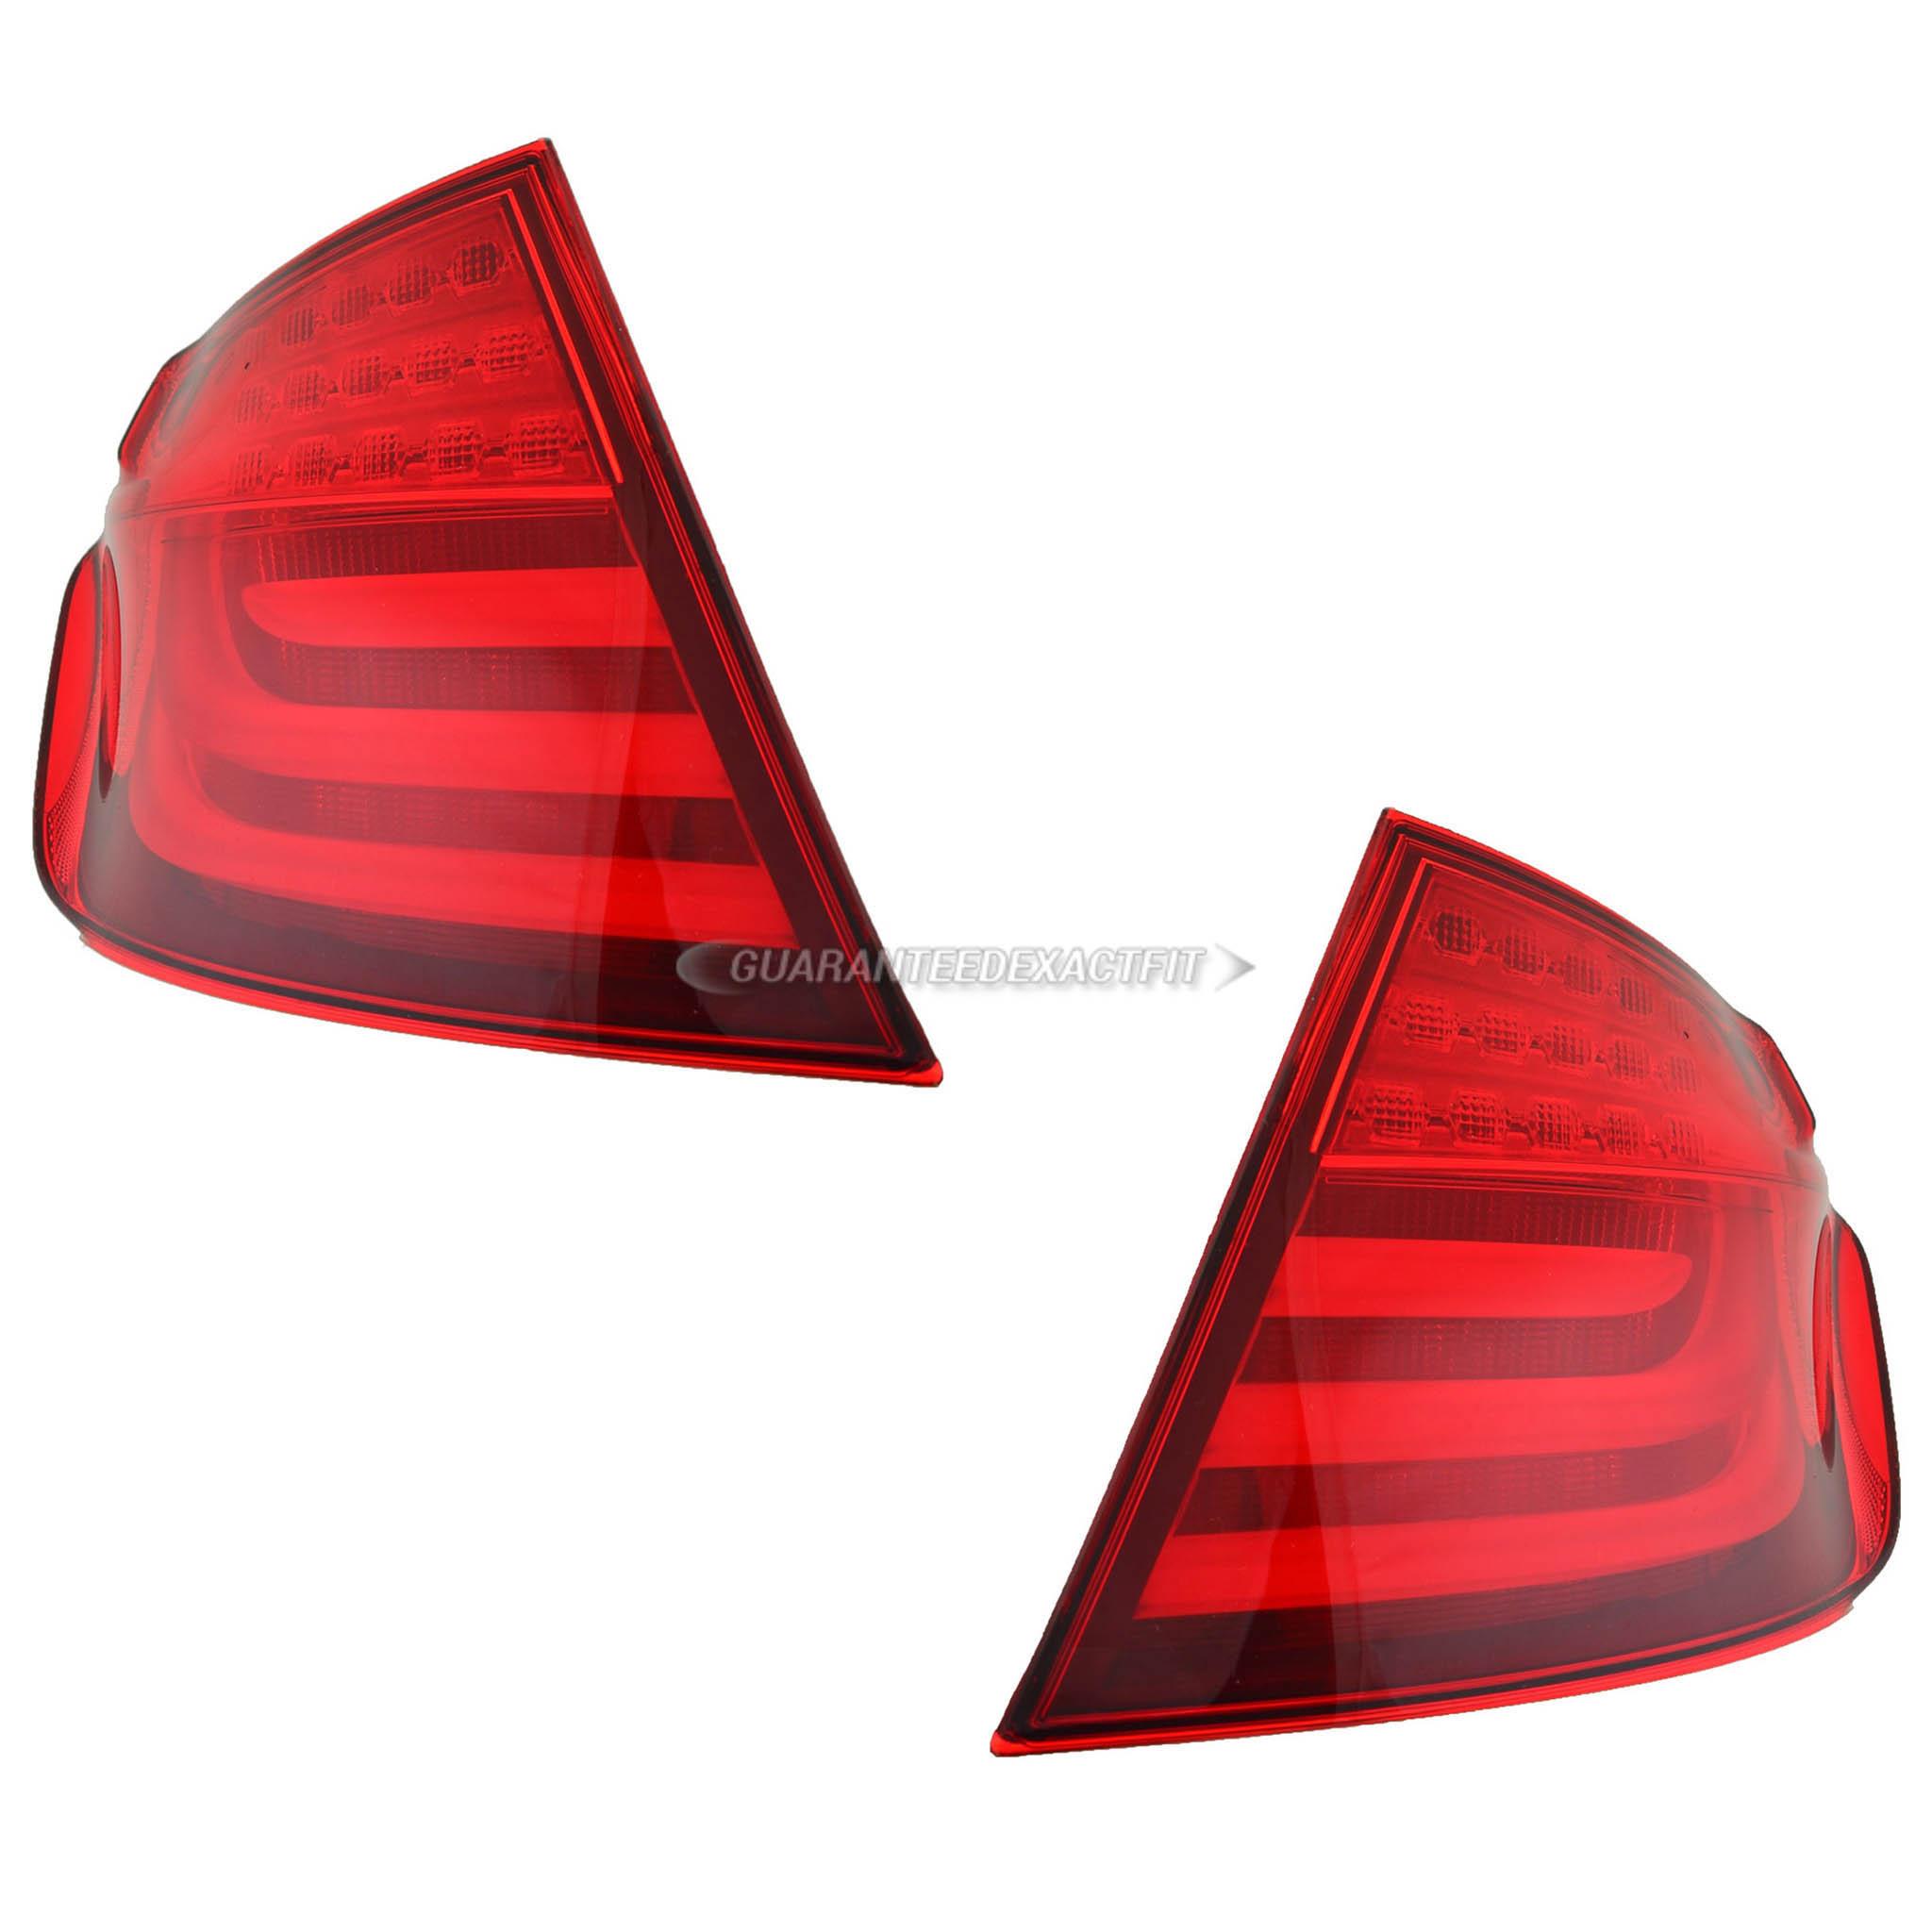  Bmw 528 tail light assembly pair 